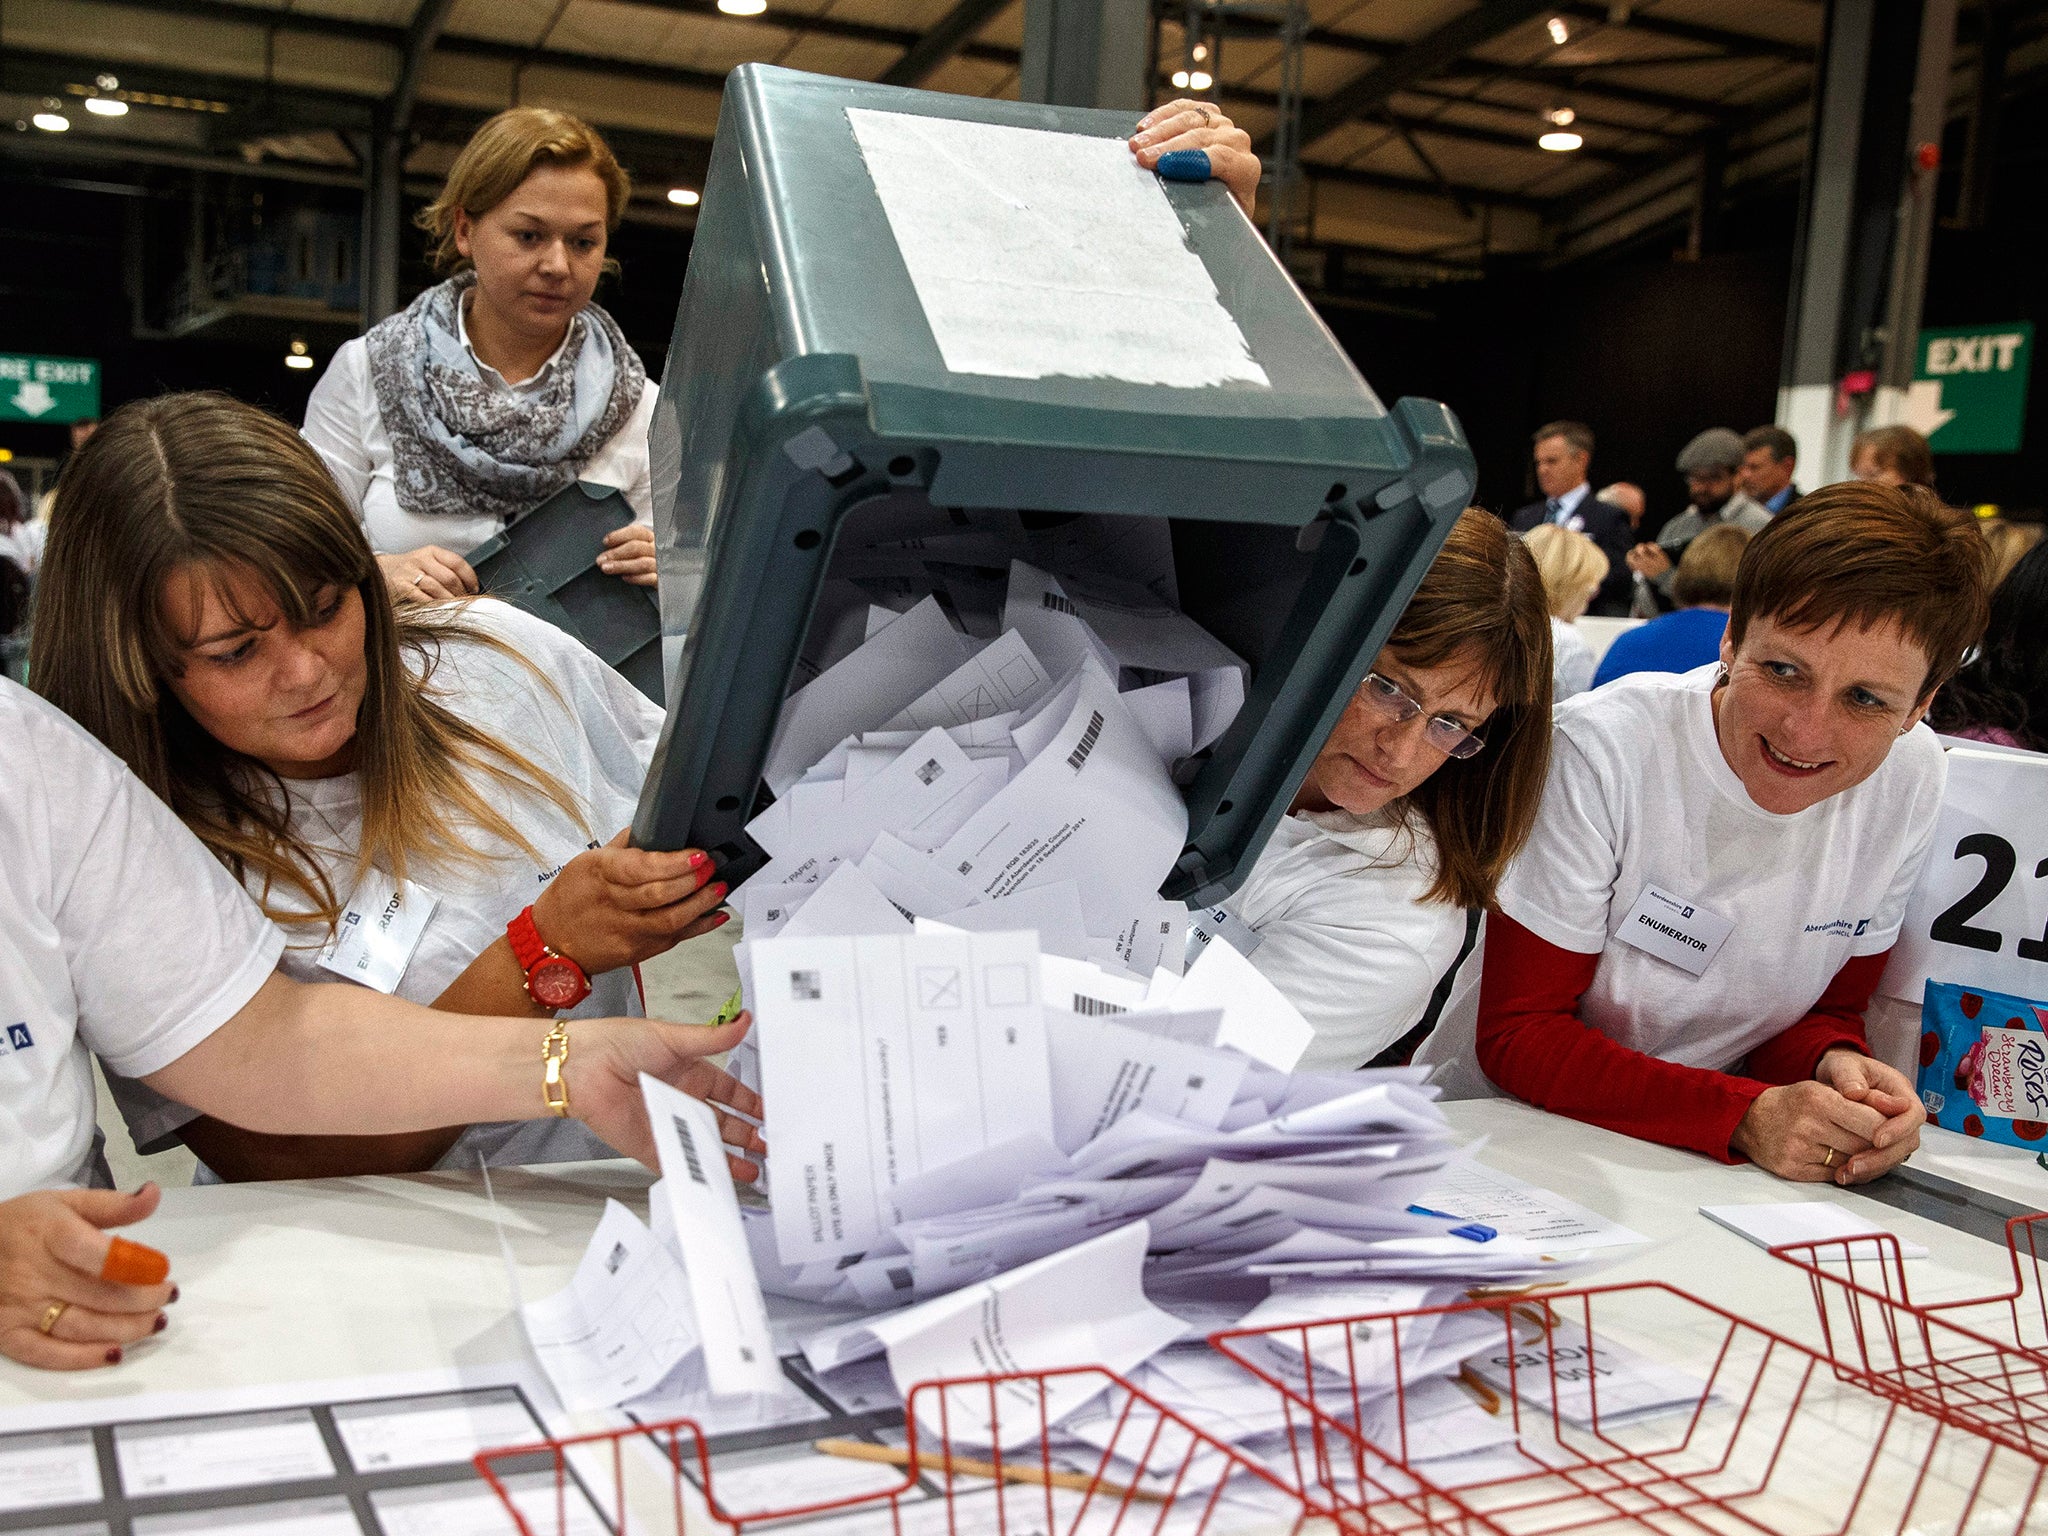 Ballots arrive to be counted at the Aberdeen Exhibition and Conference Centre during the Scottish referendum in Aberdeen